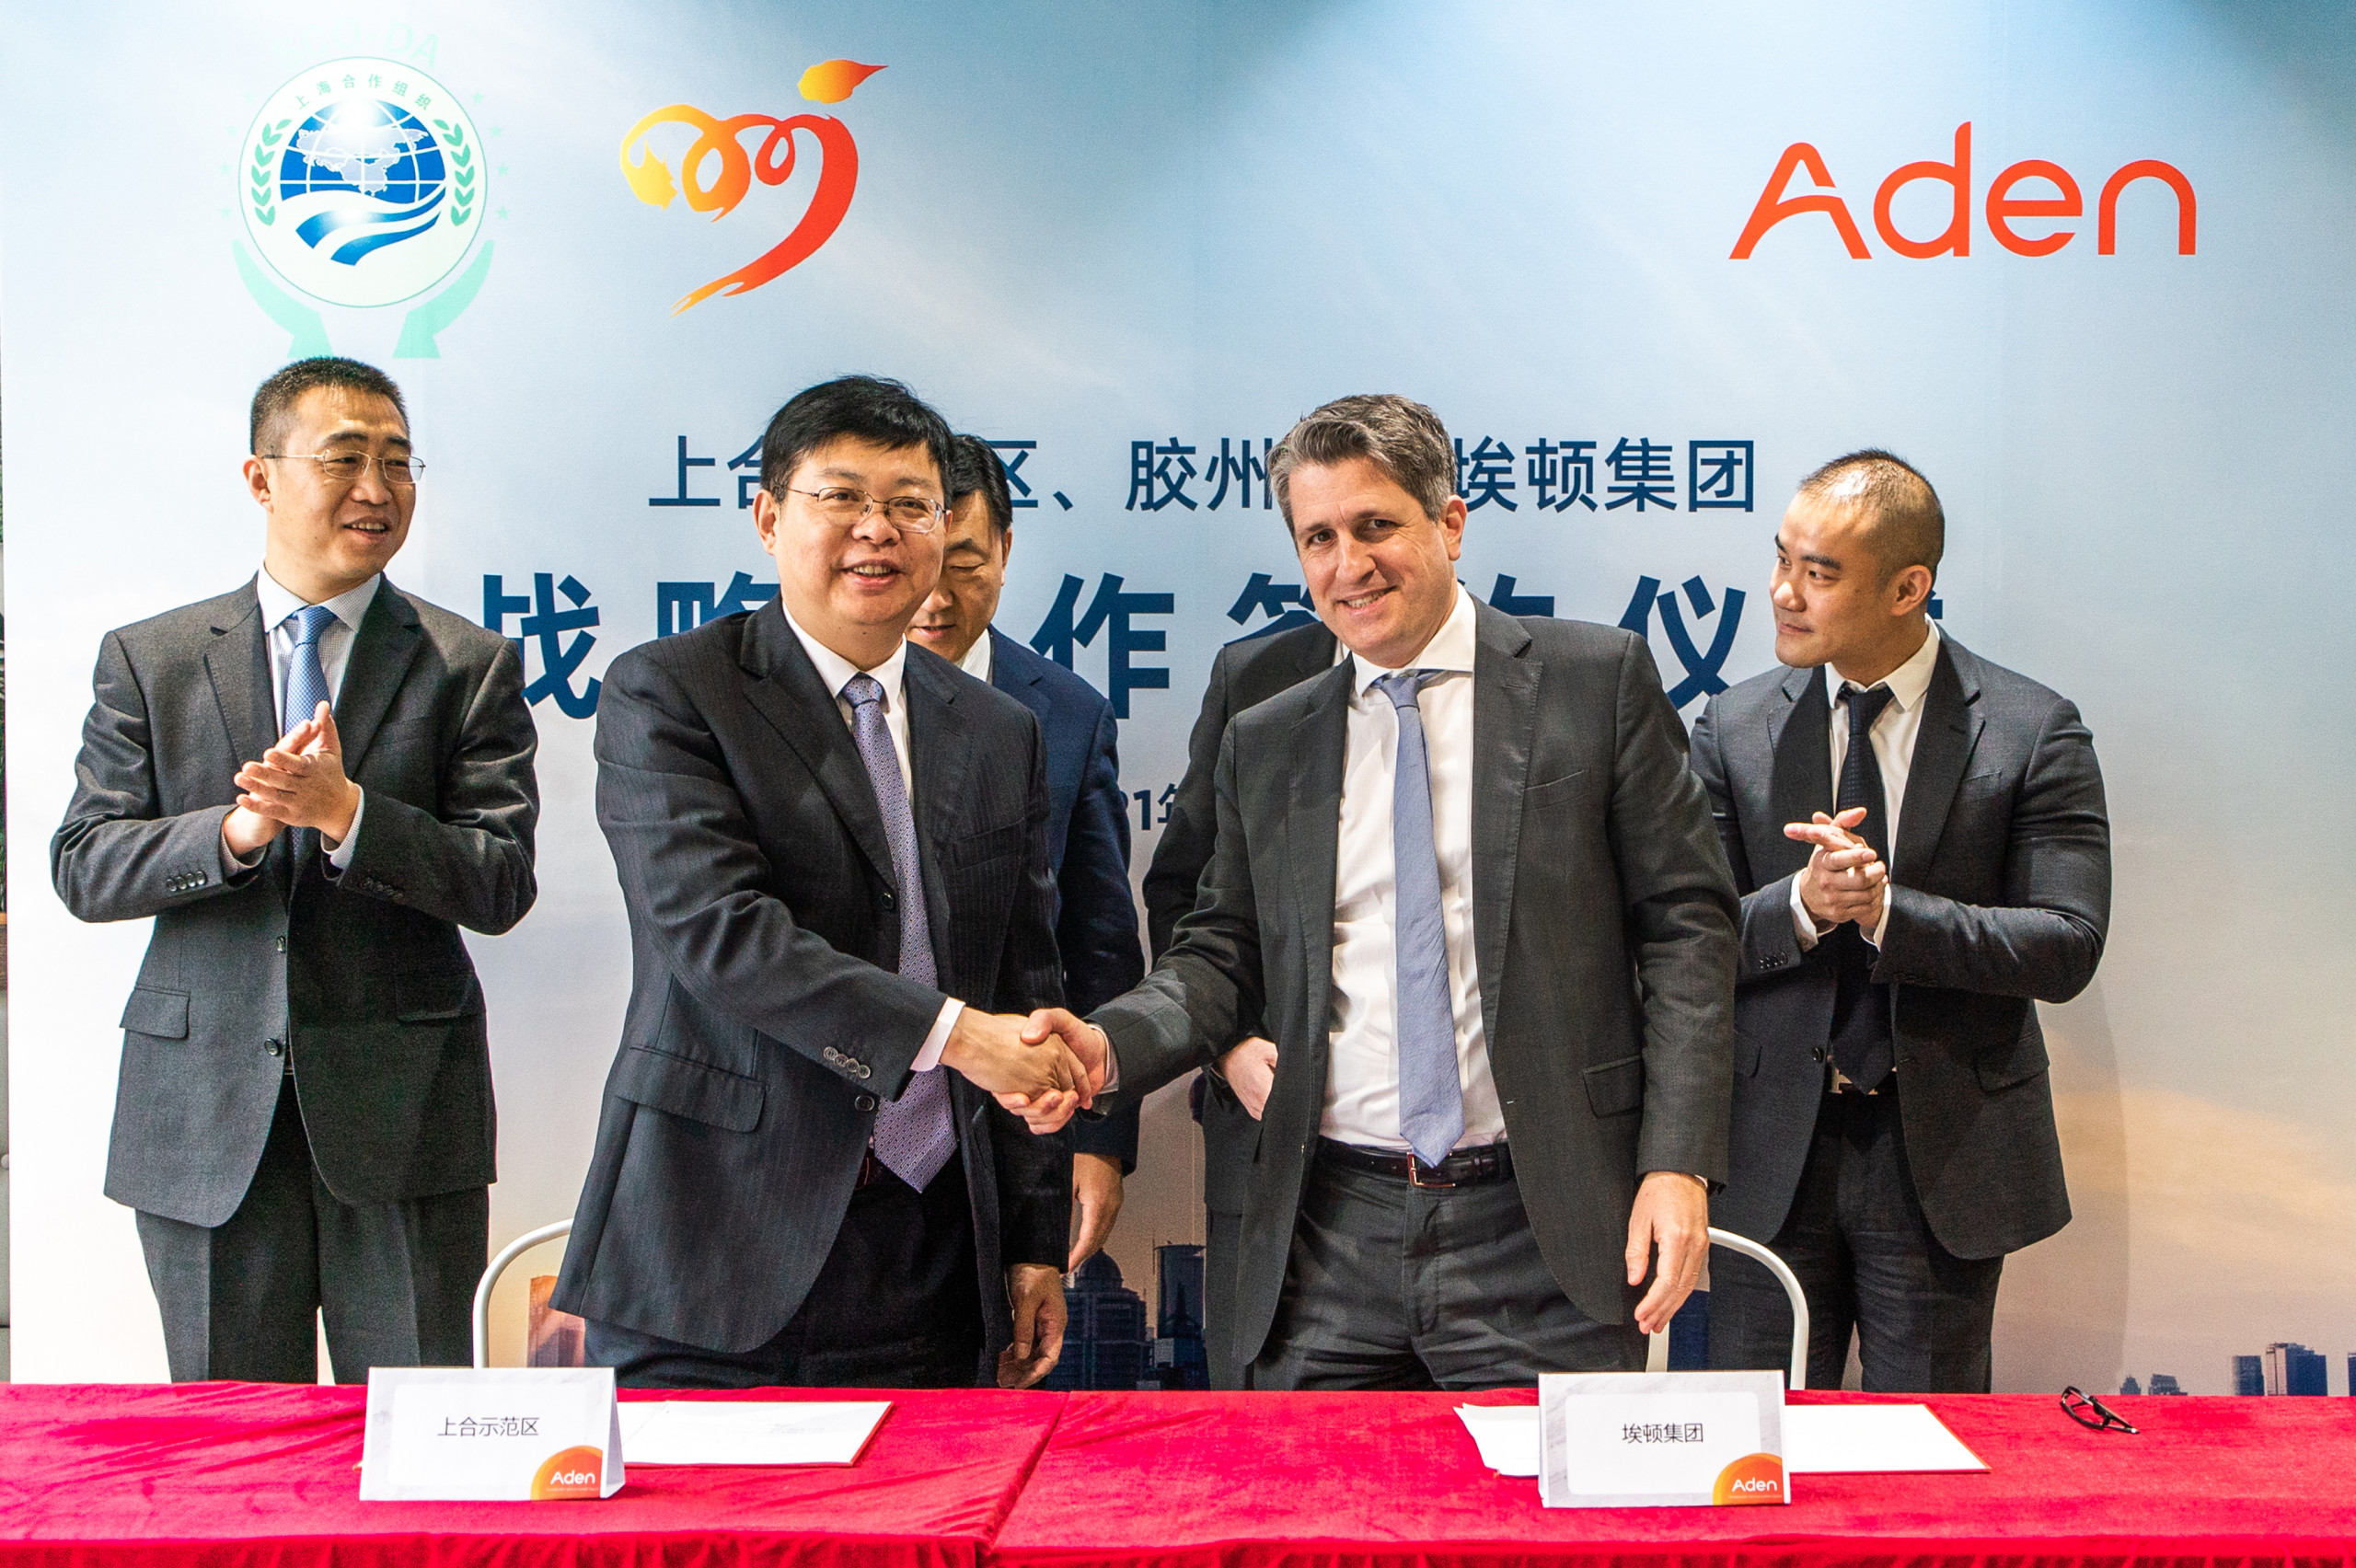 Qingdao signs MOU with Aden